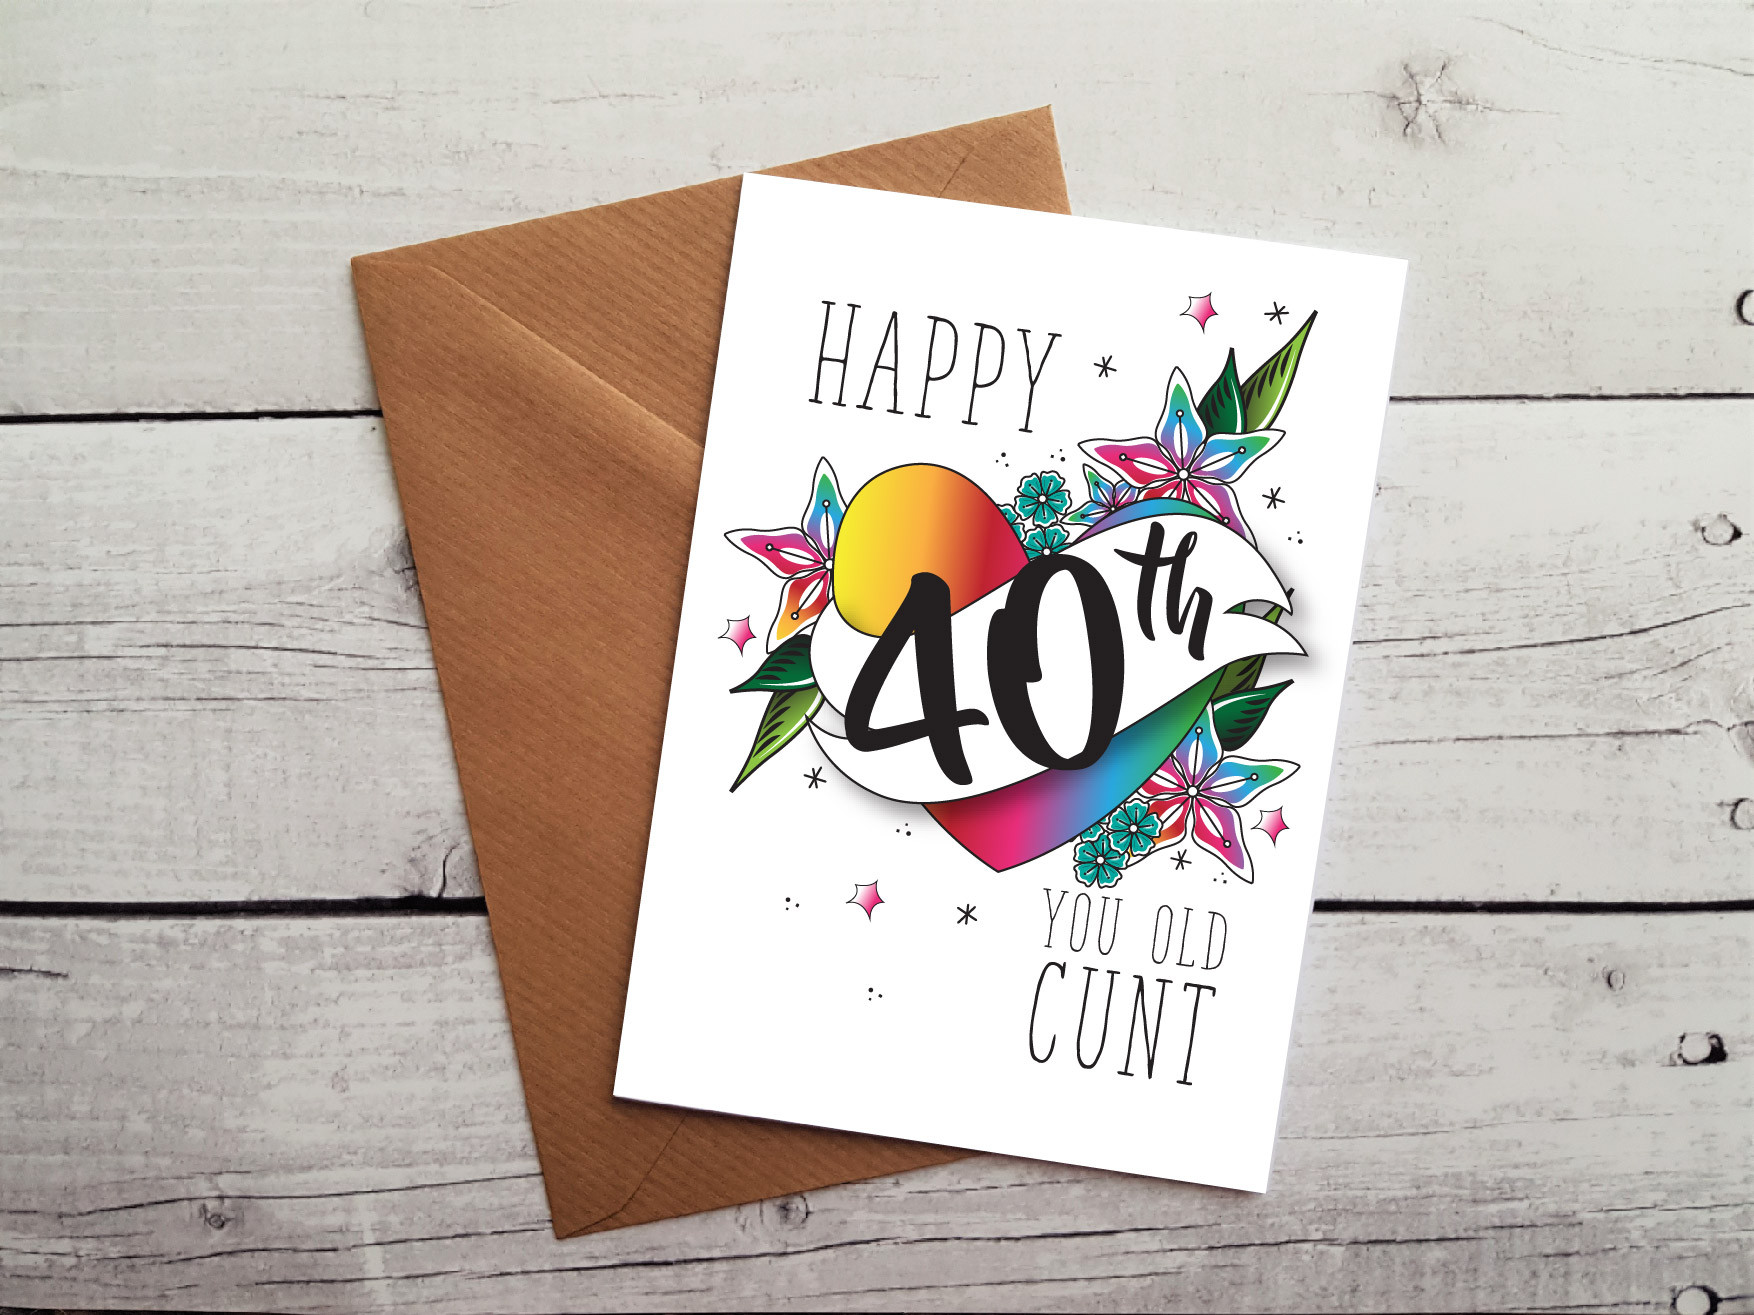 40th Birthday Card
 Insulting 40th Birthday Card Happy 40th You Old Cunt